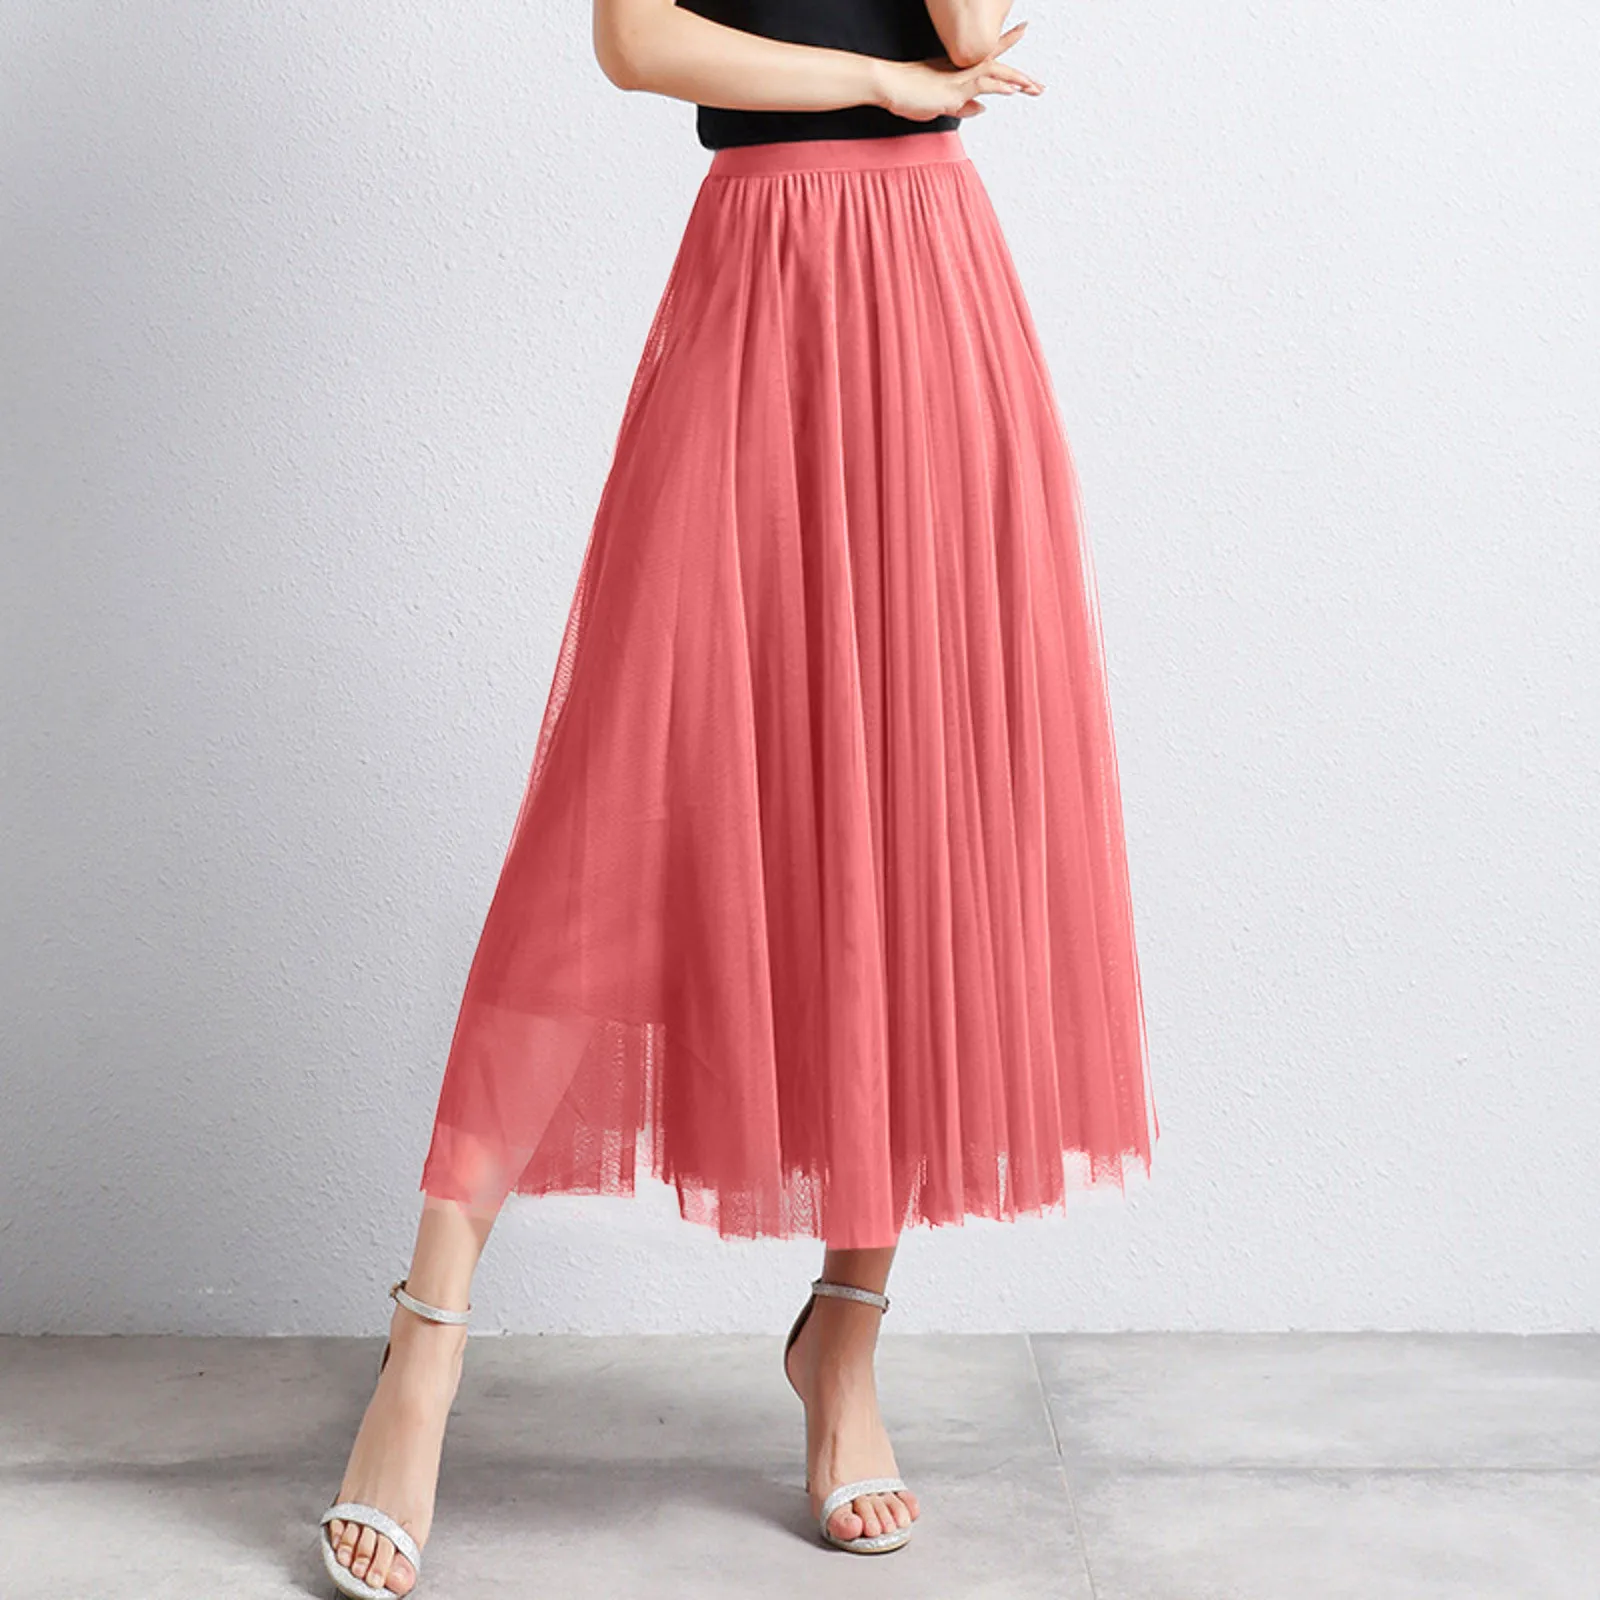 

Holiday Party Costume Flattering Chic Maxi Skirt With High-Waisted Cut And Puffy Lace Perfect For Summer Festivals And Dancewear